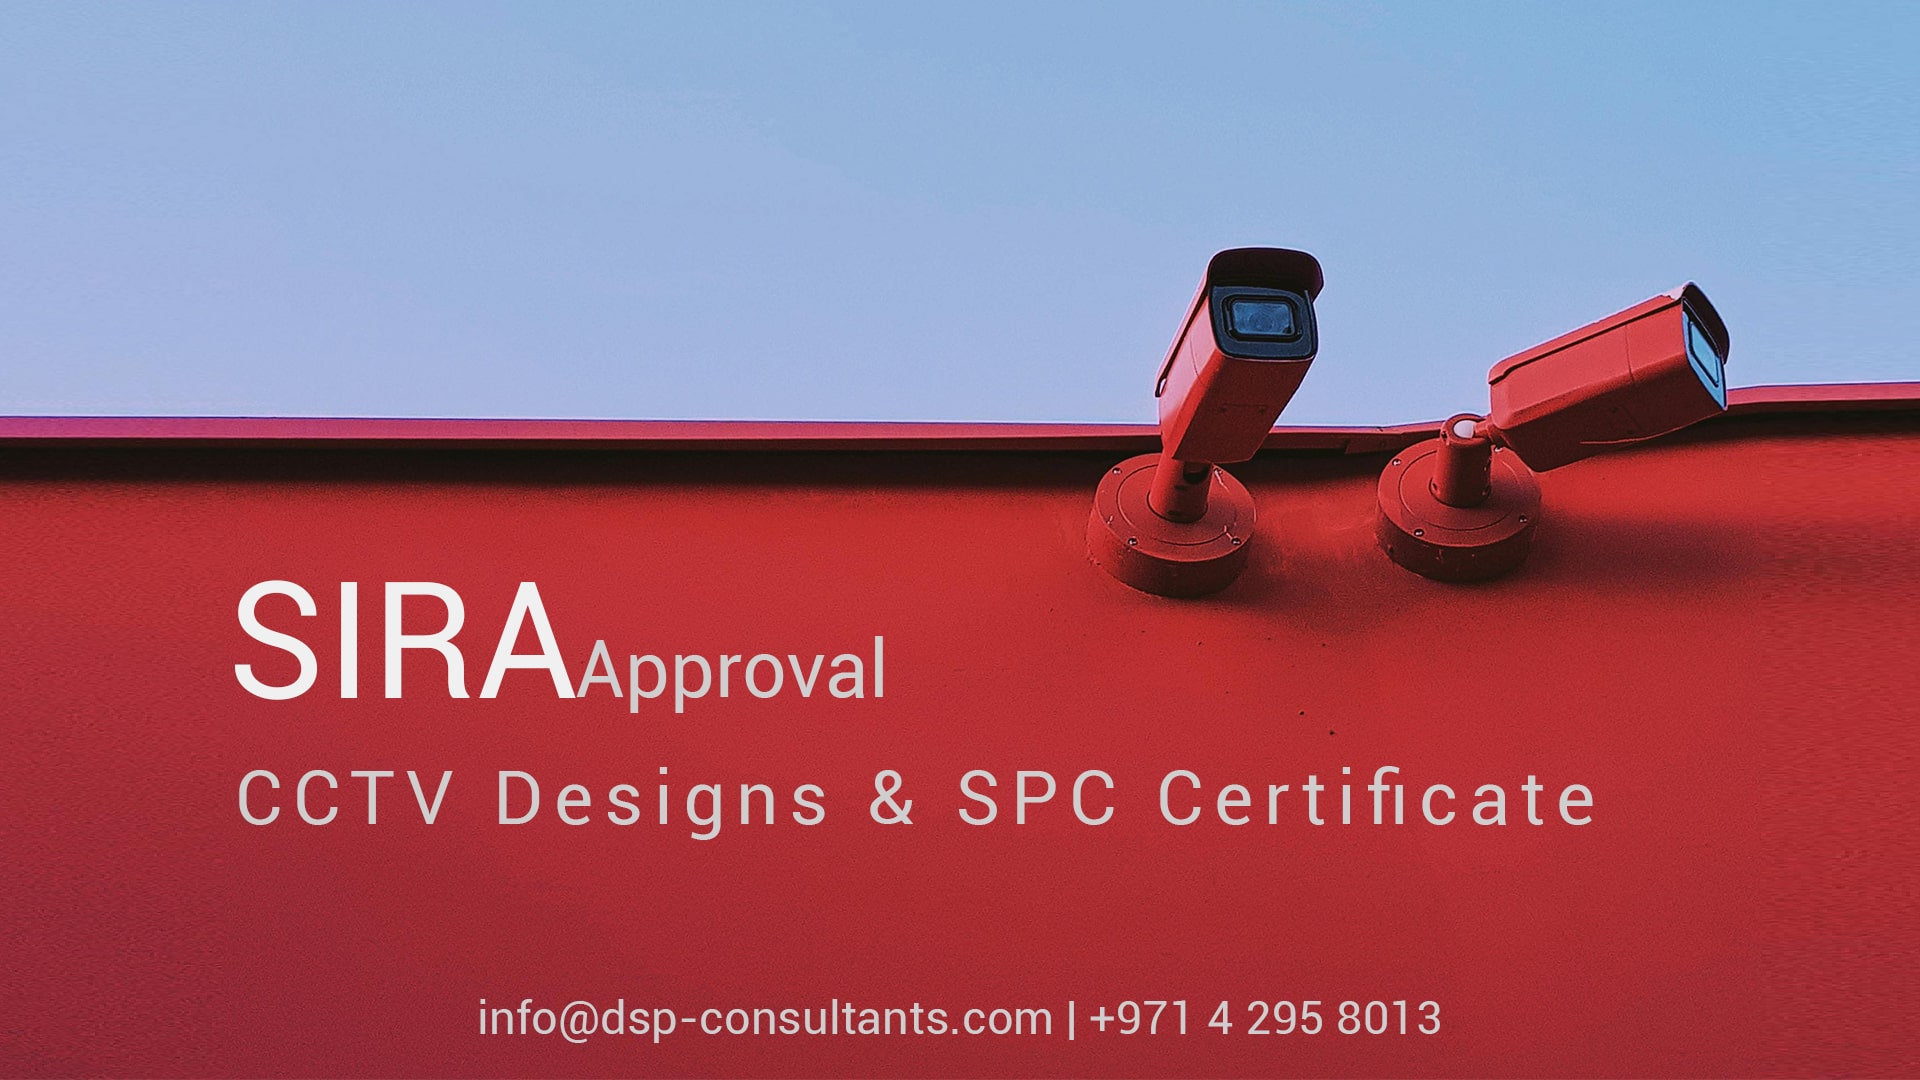 Contact DSP Consultants for obtaining SIRA Approval for CCTV design Layoutsr